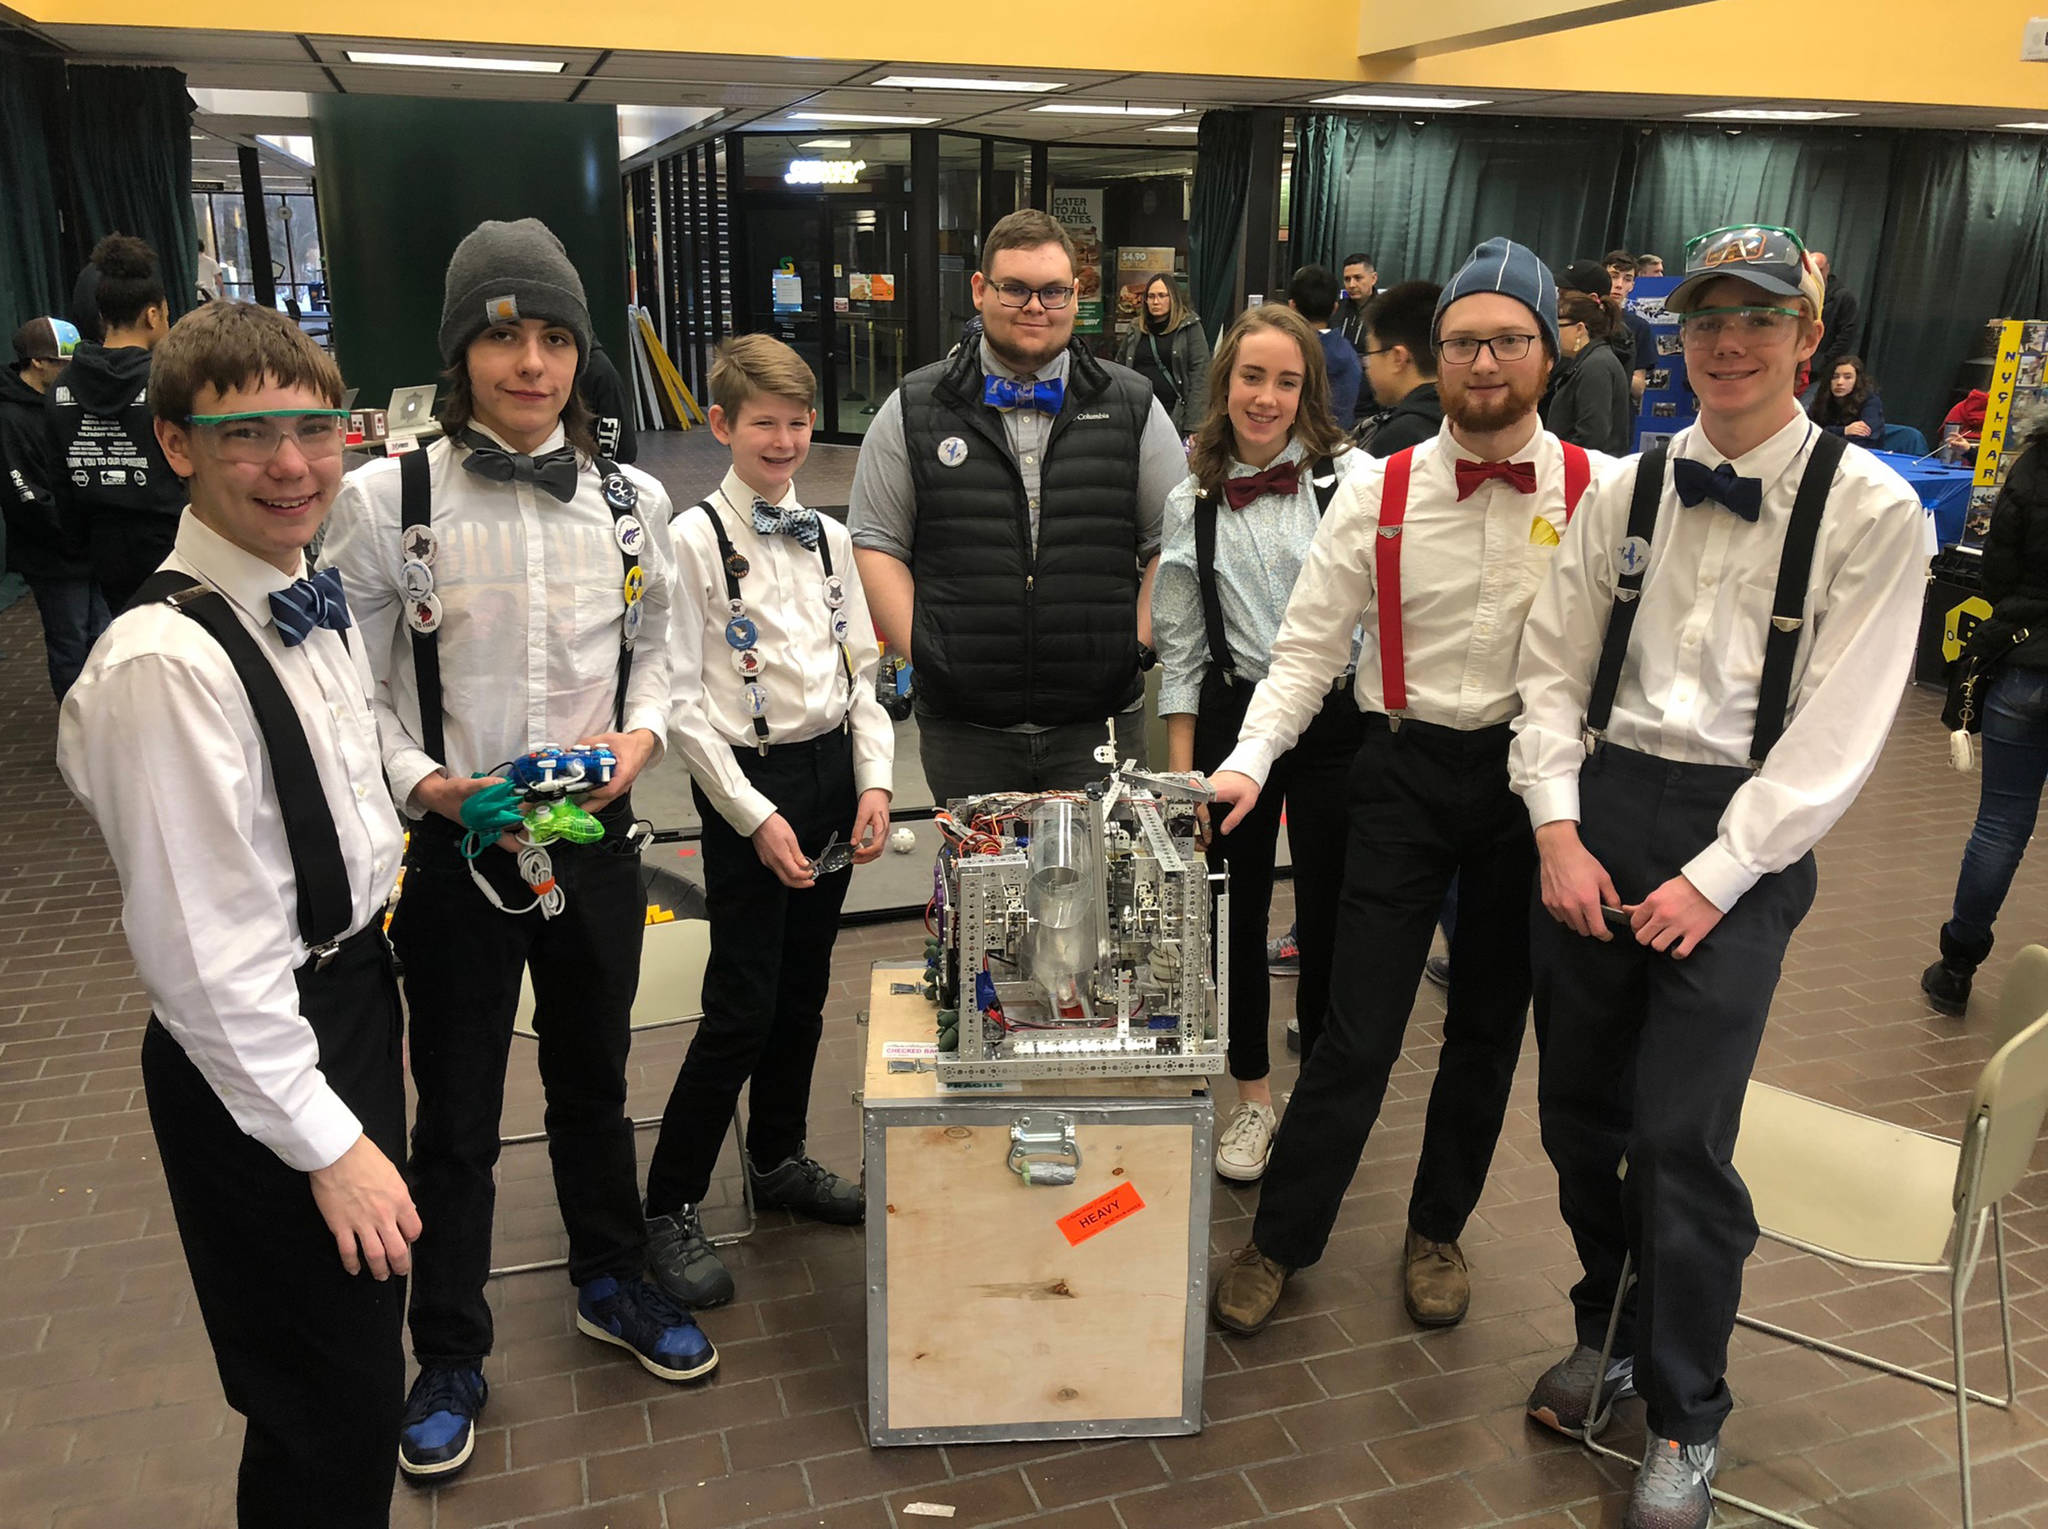 Thunder Mountain High School’s “Trial and Error” robotics team took first place at the state championship at the University of Alaska Anchorage from Feb 1-2, 2019. Eight students were on the winning team: Seniors Noatak Post, Eli Douglas, Riley Sikes and Sterling Zuboff; Juniors Teilhard Buzzell and Ian Sheridan; and Freshmen Grace Sikes and Darin Tingey. (Courtesy Photo)